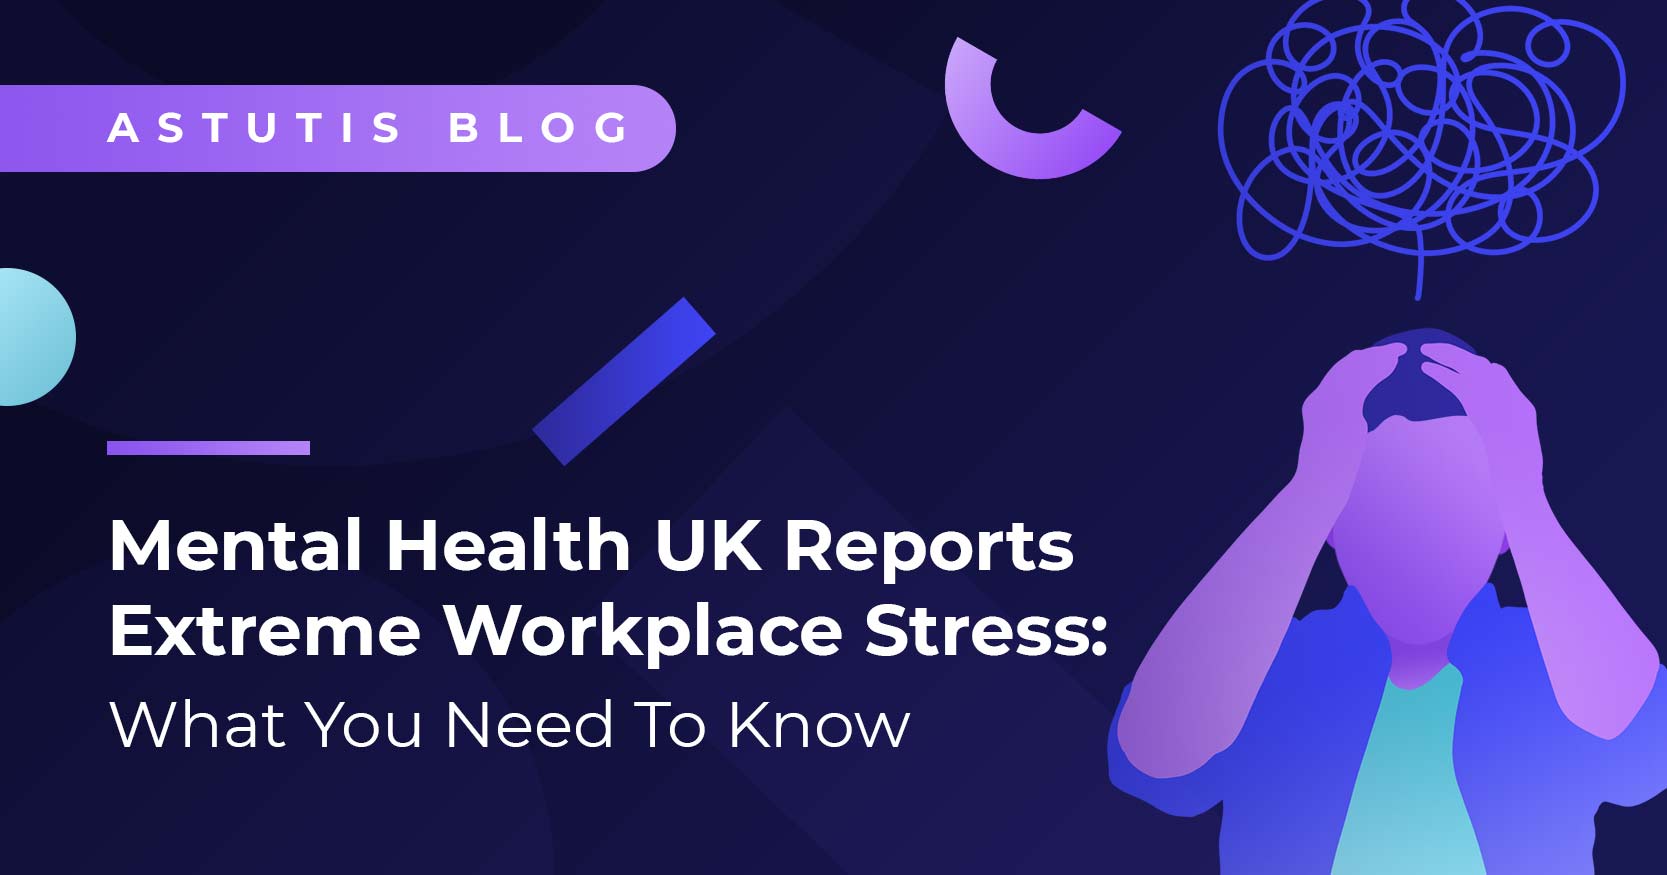 Mental Health UK Reports Extreme Workplace Stress: What You Need to Know Image